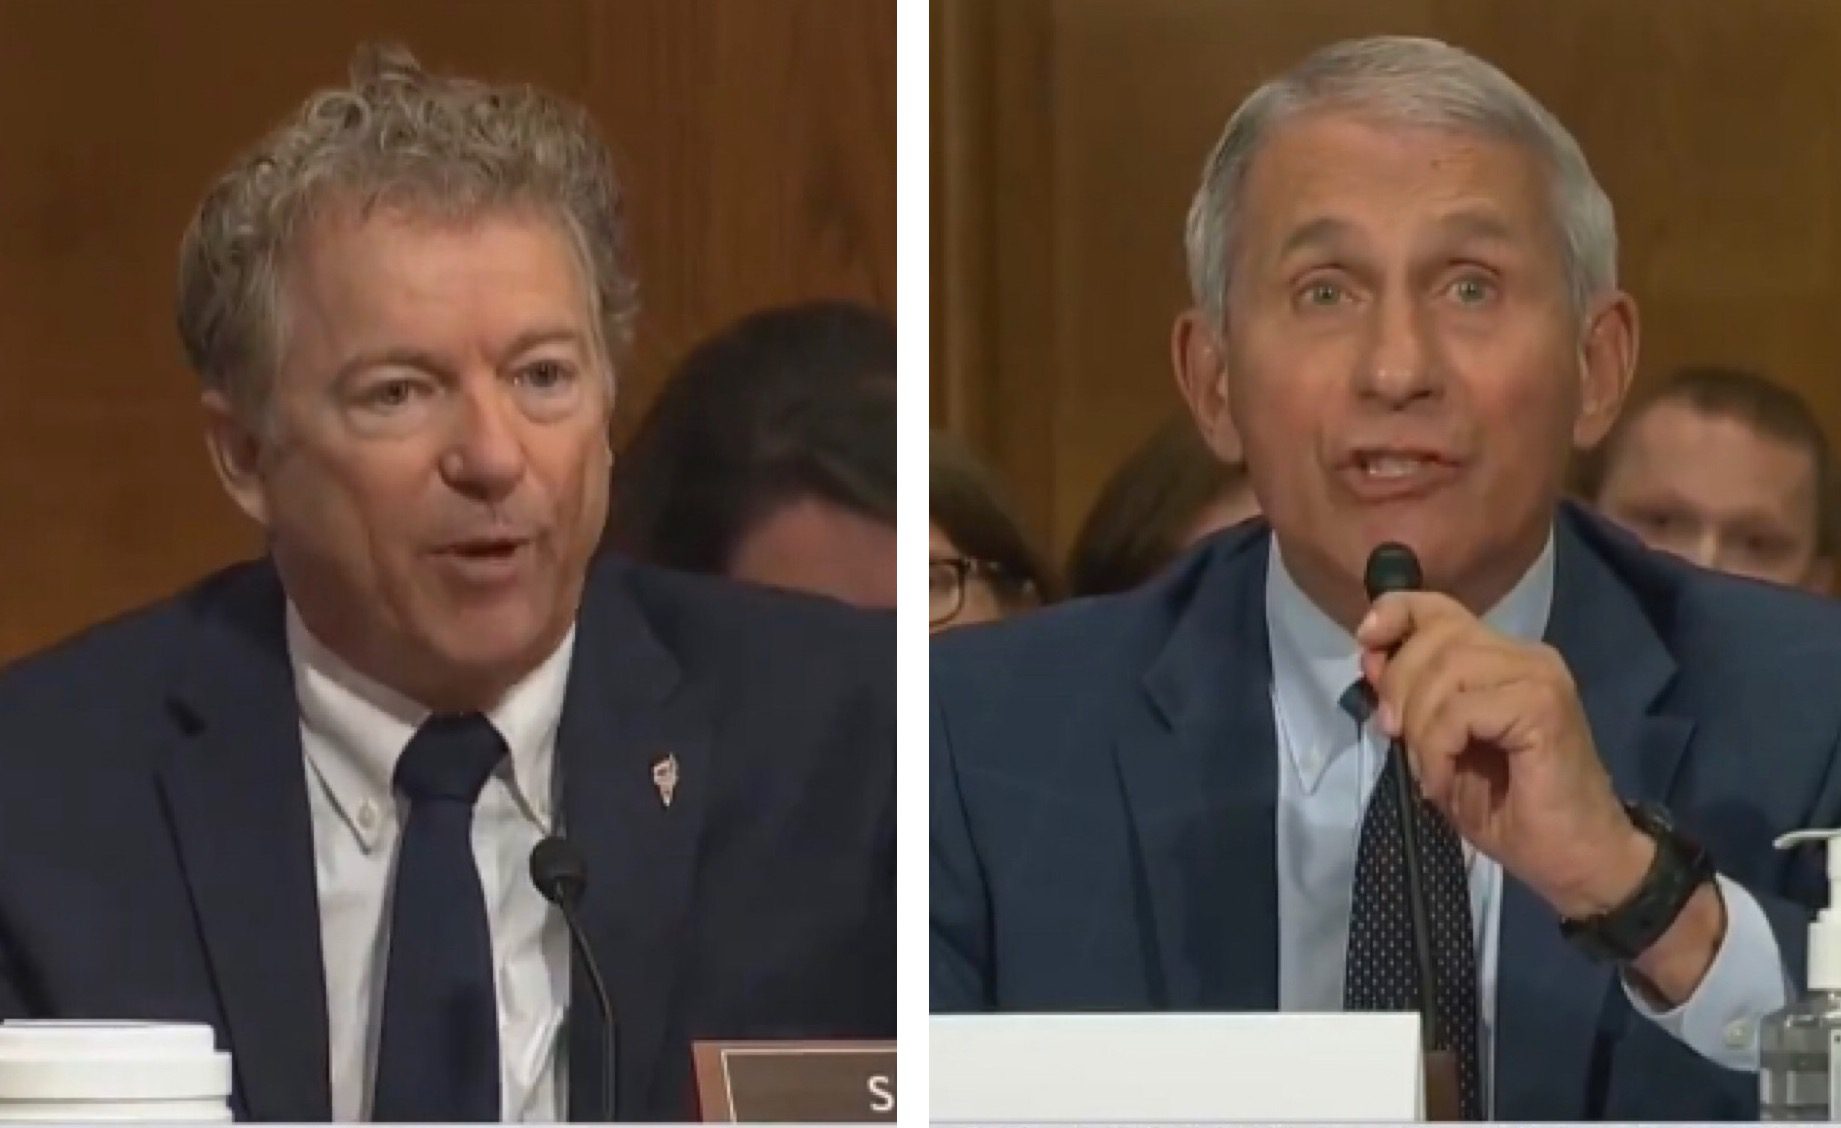 Rand Paul Criminally Refers Dr. Fauci to DOJ For Prosecution For Lying to Congress About Gain-of-Function